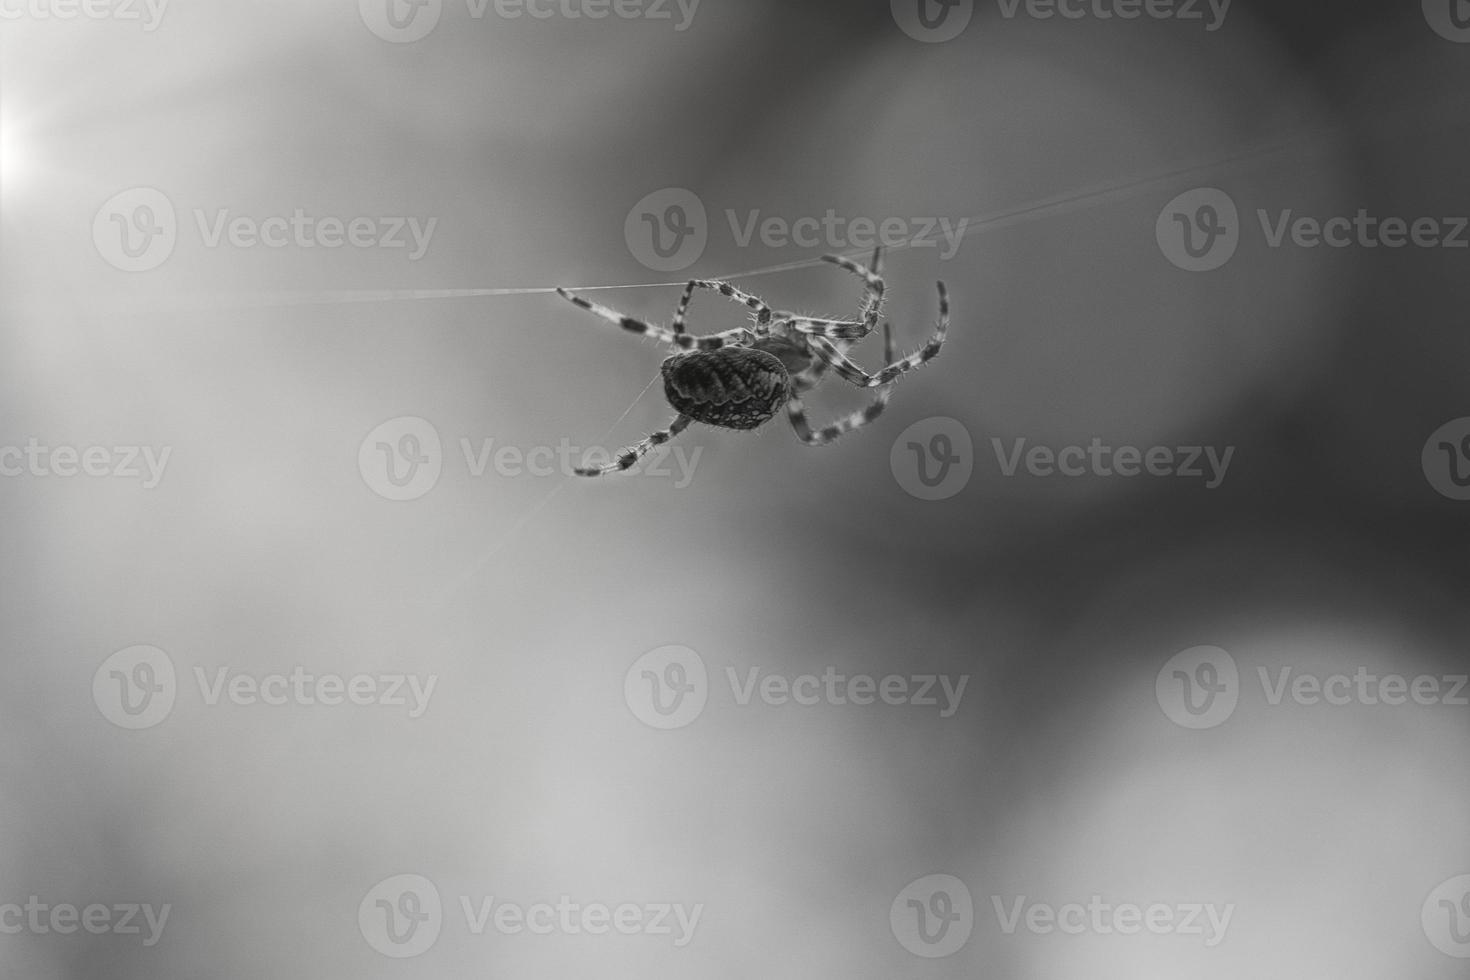 Cross spider shot in black and white, crawling on a spider thread. Blurred photo